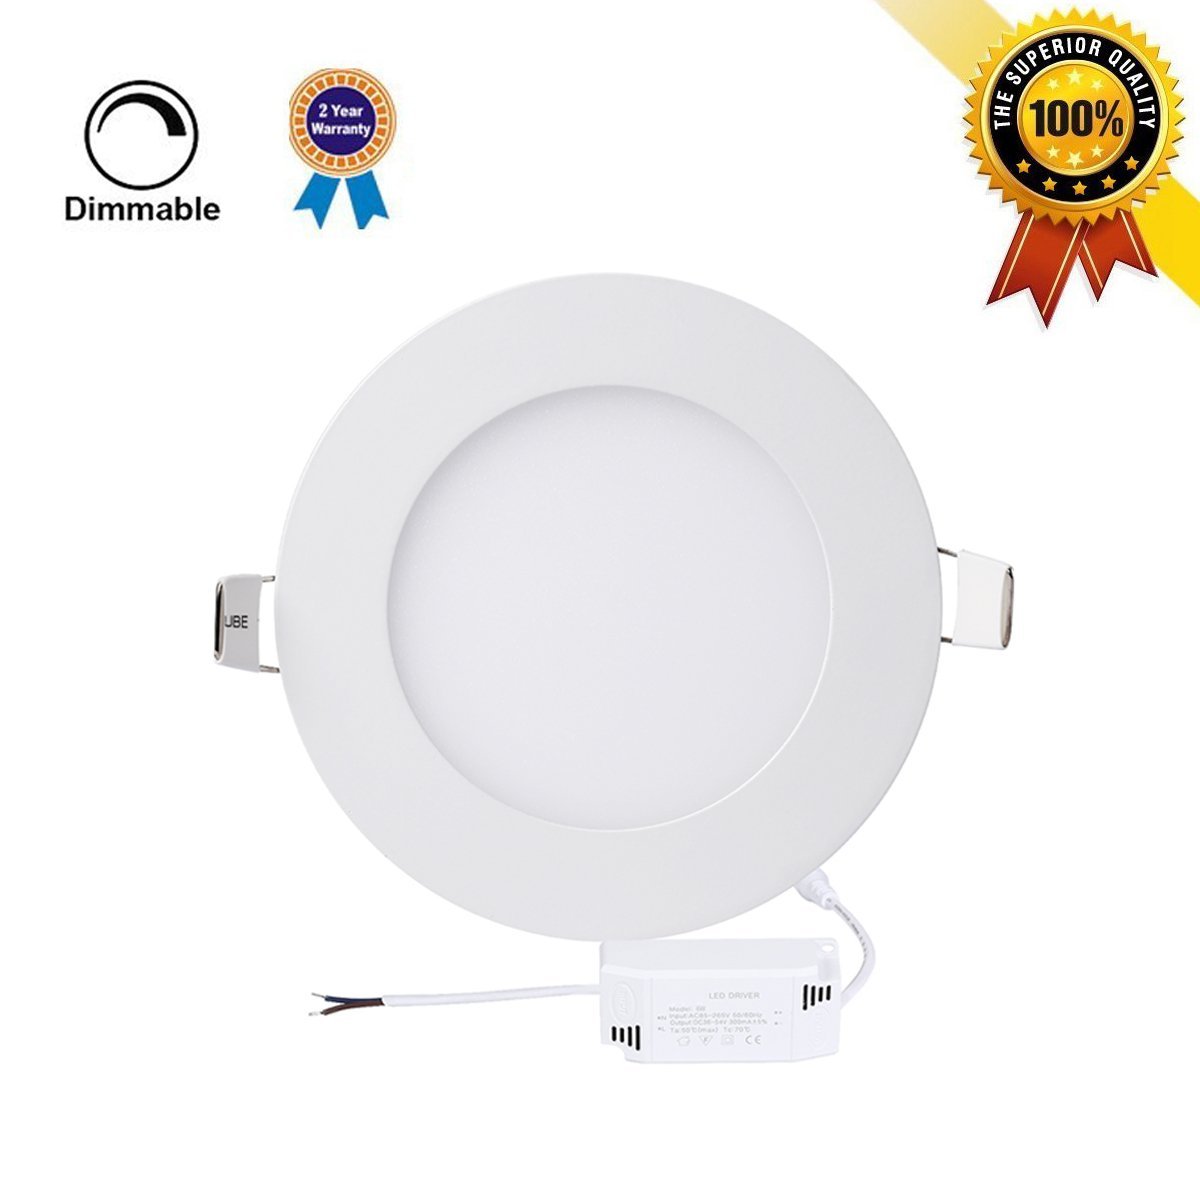 P&B Lighting 12W Dimmable Round LED Panel Light Lamp, Ultra-thin Recessed Ceiling Light, 80W Incandescent Equivalent, 960lm, Neutral White 4000K, Cut Hole 6.1 Inch, Downlight with 110V LED Driver